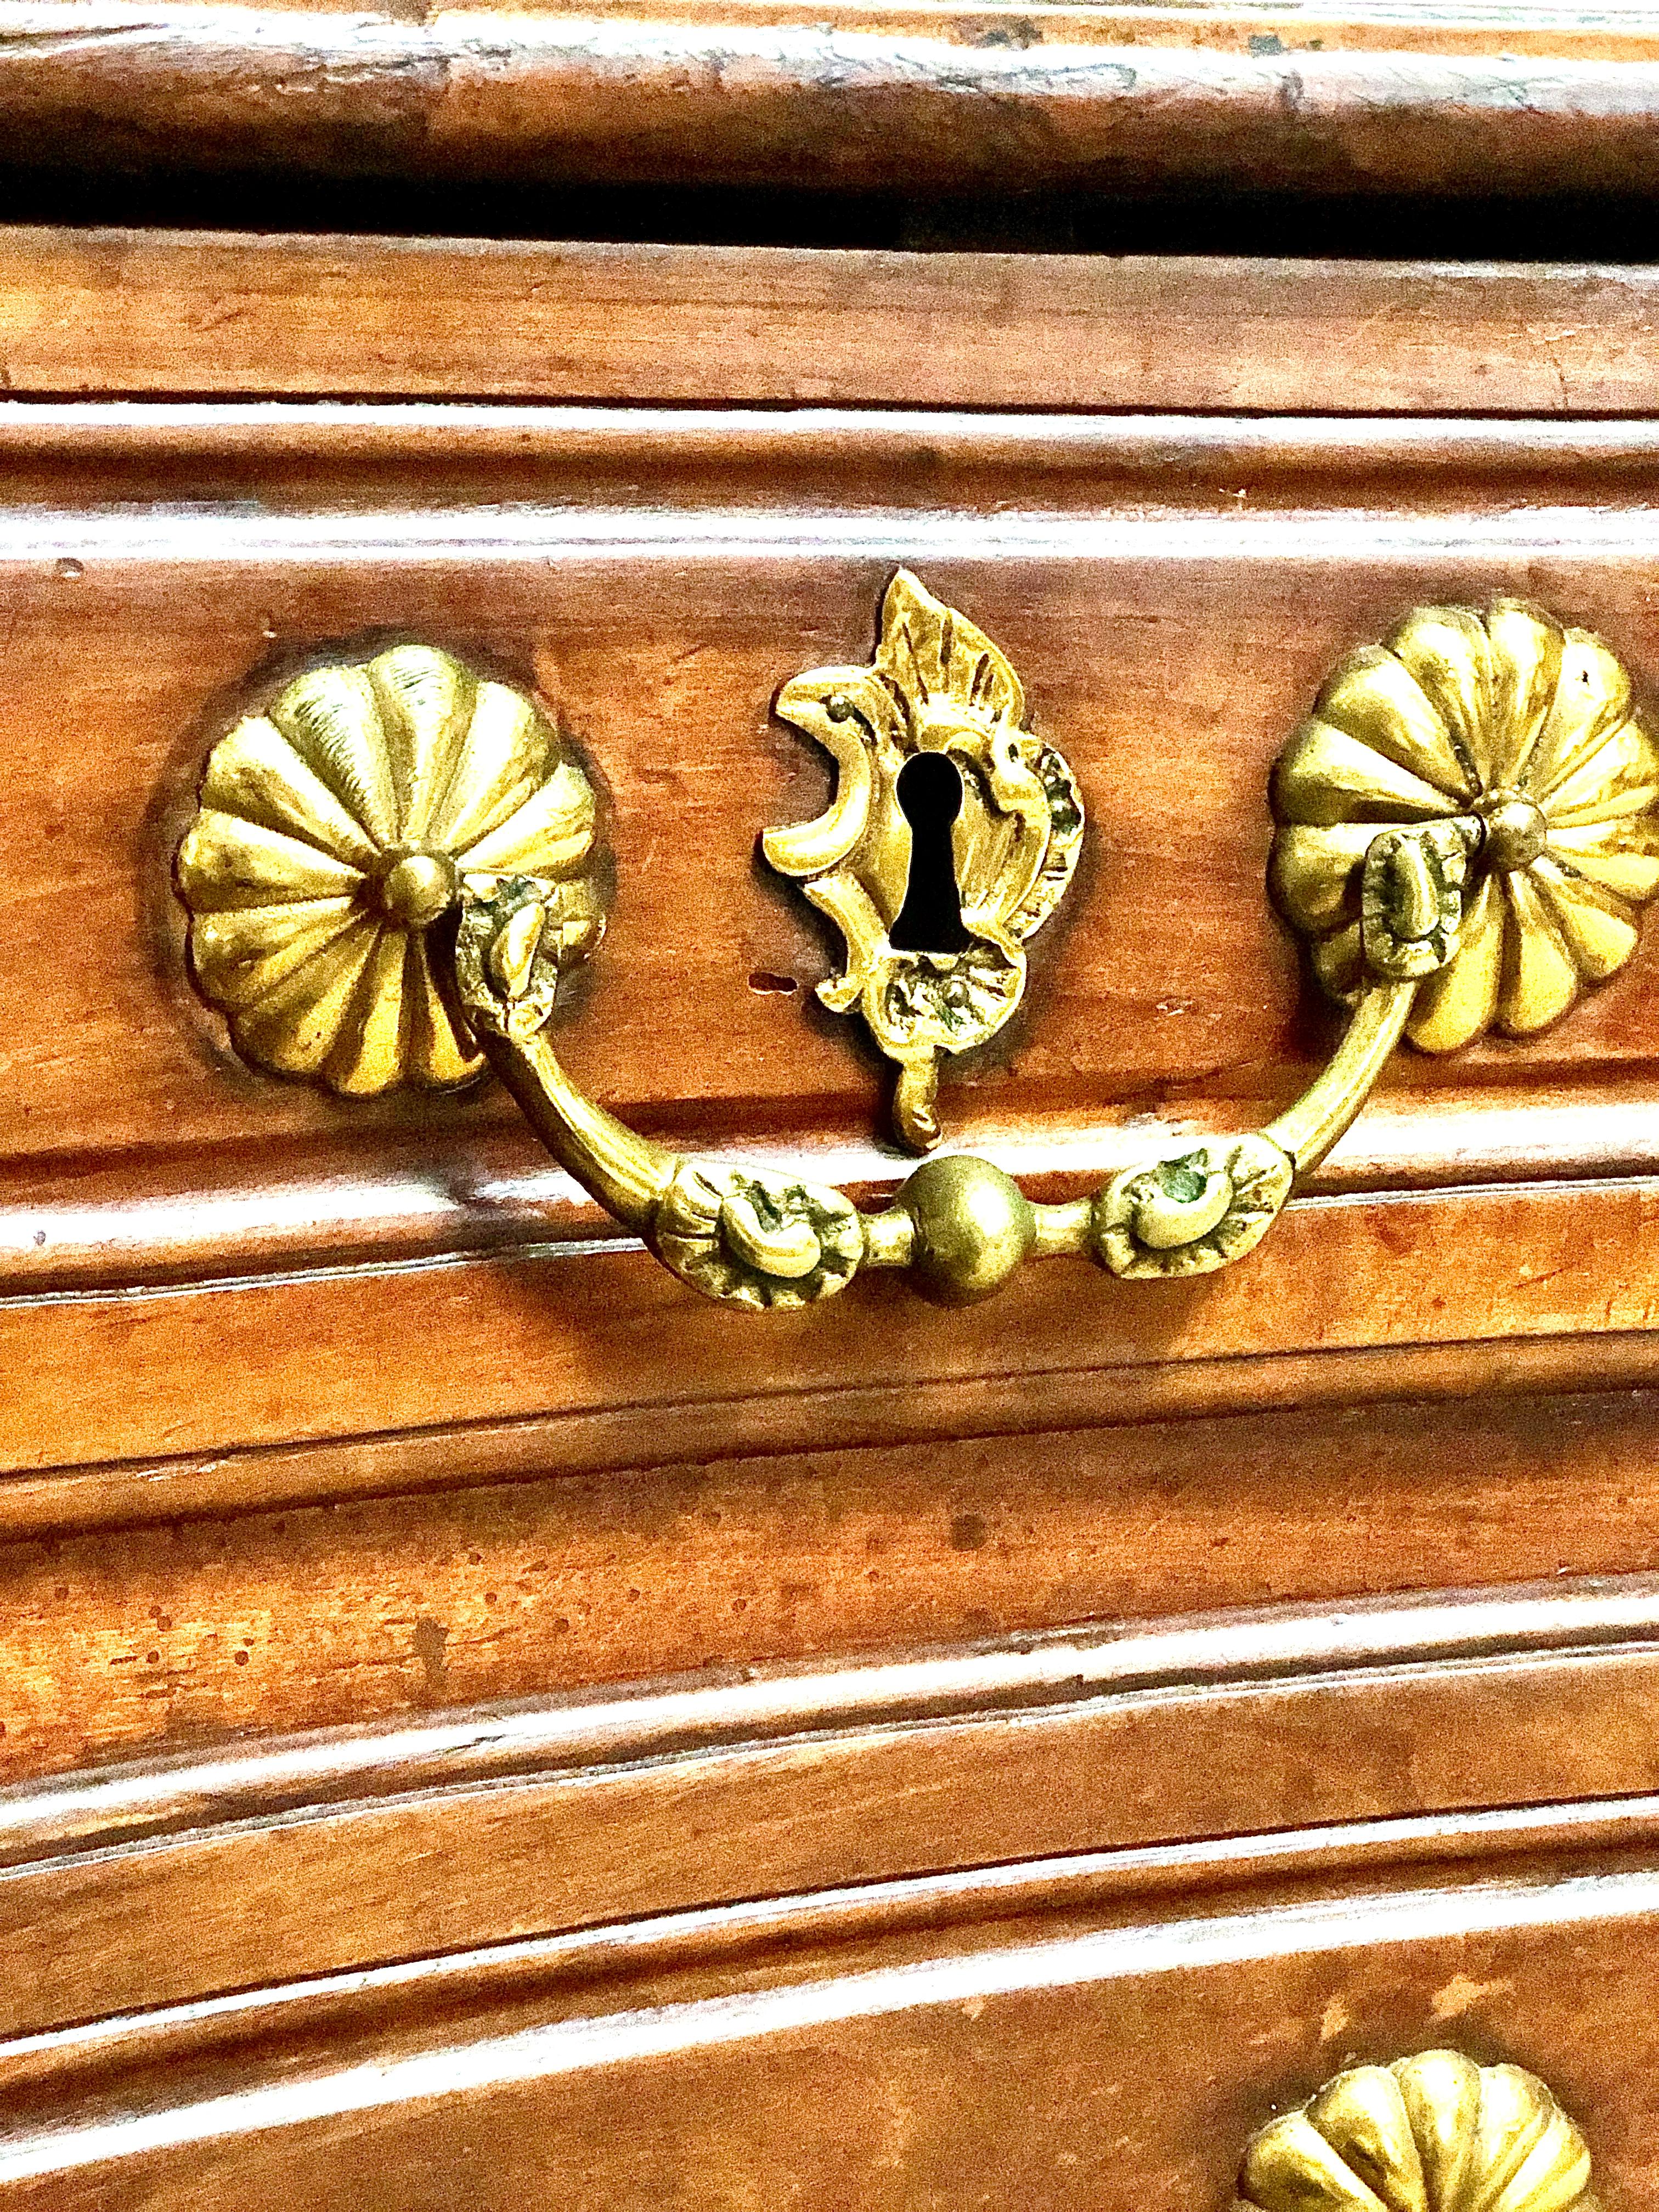 A magnificent 18th century French Louis XV Epoque serpentine fruitwood commode chest of four drawers, standing on elegantly carved feet. Distributed over three rows, each moulded drawer is ornately decorated with gilt bronze handles and escutcheons.